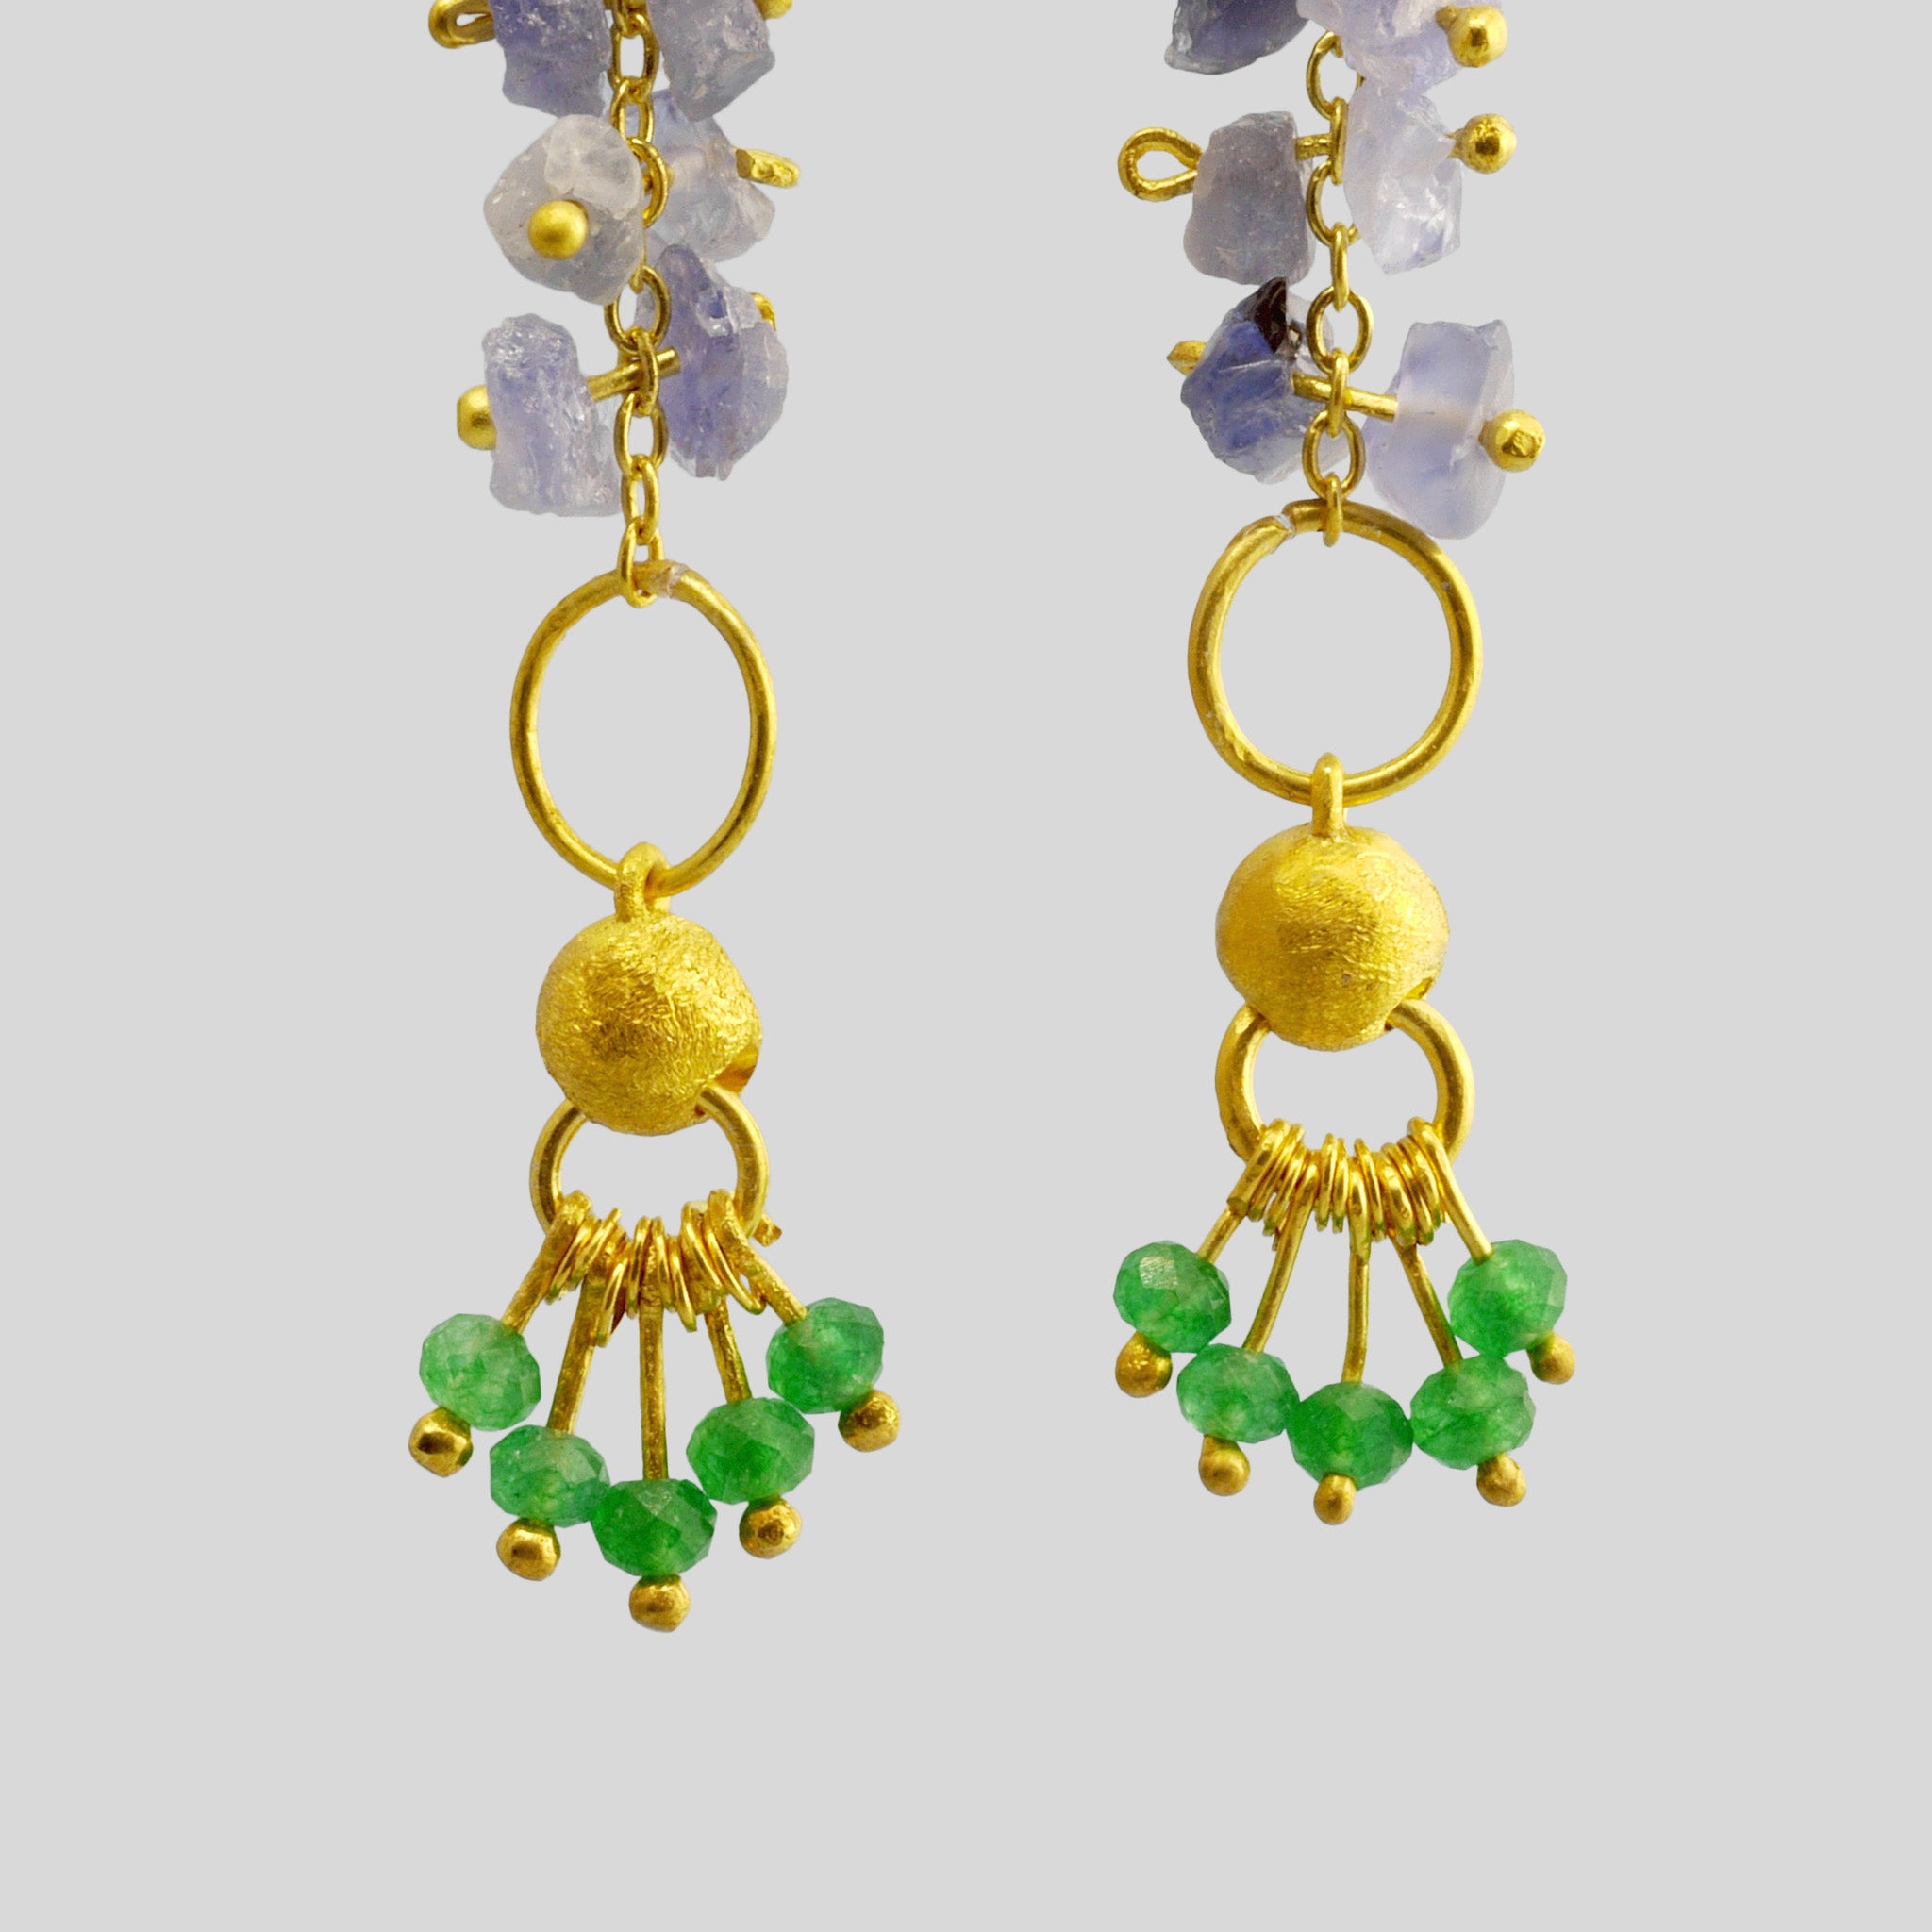 detail of Hand-crafted 18k Yellow Gold Venus Earrings with raw Sapphire and Emerald accents, exuding organic beauty and luxury for any occasion.